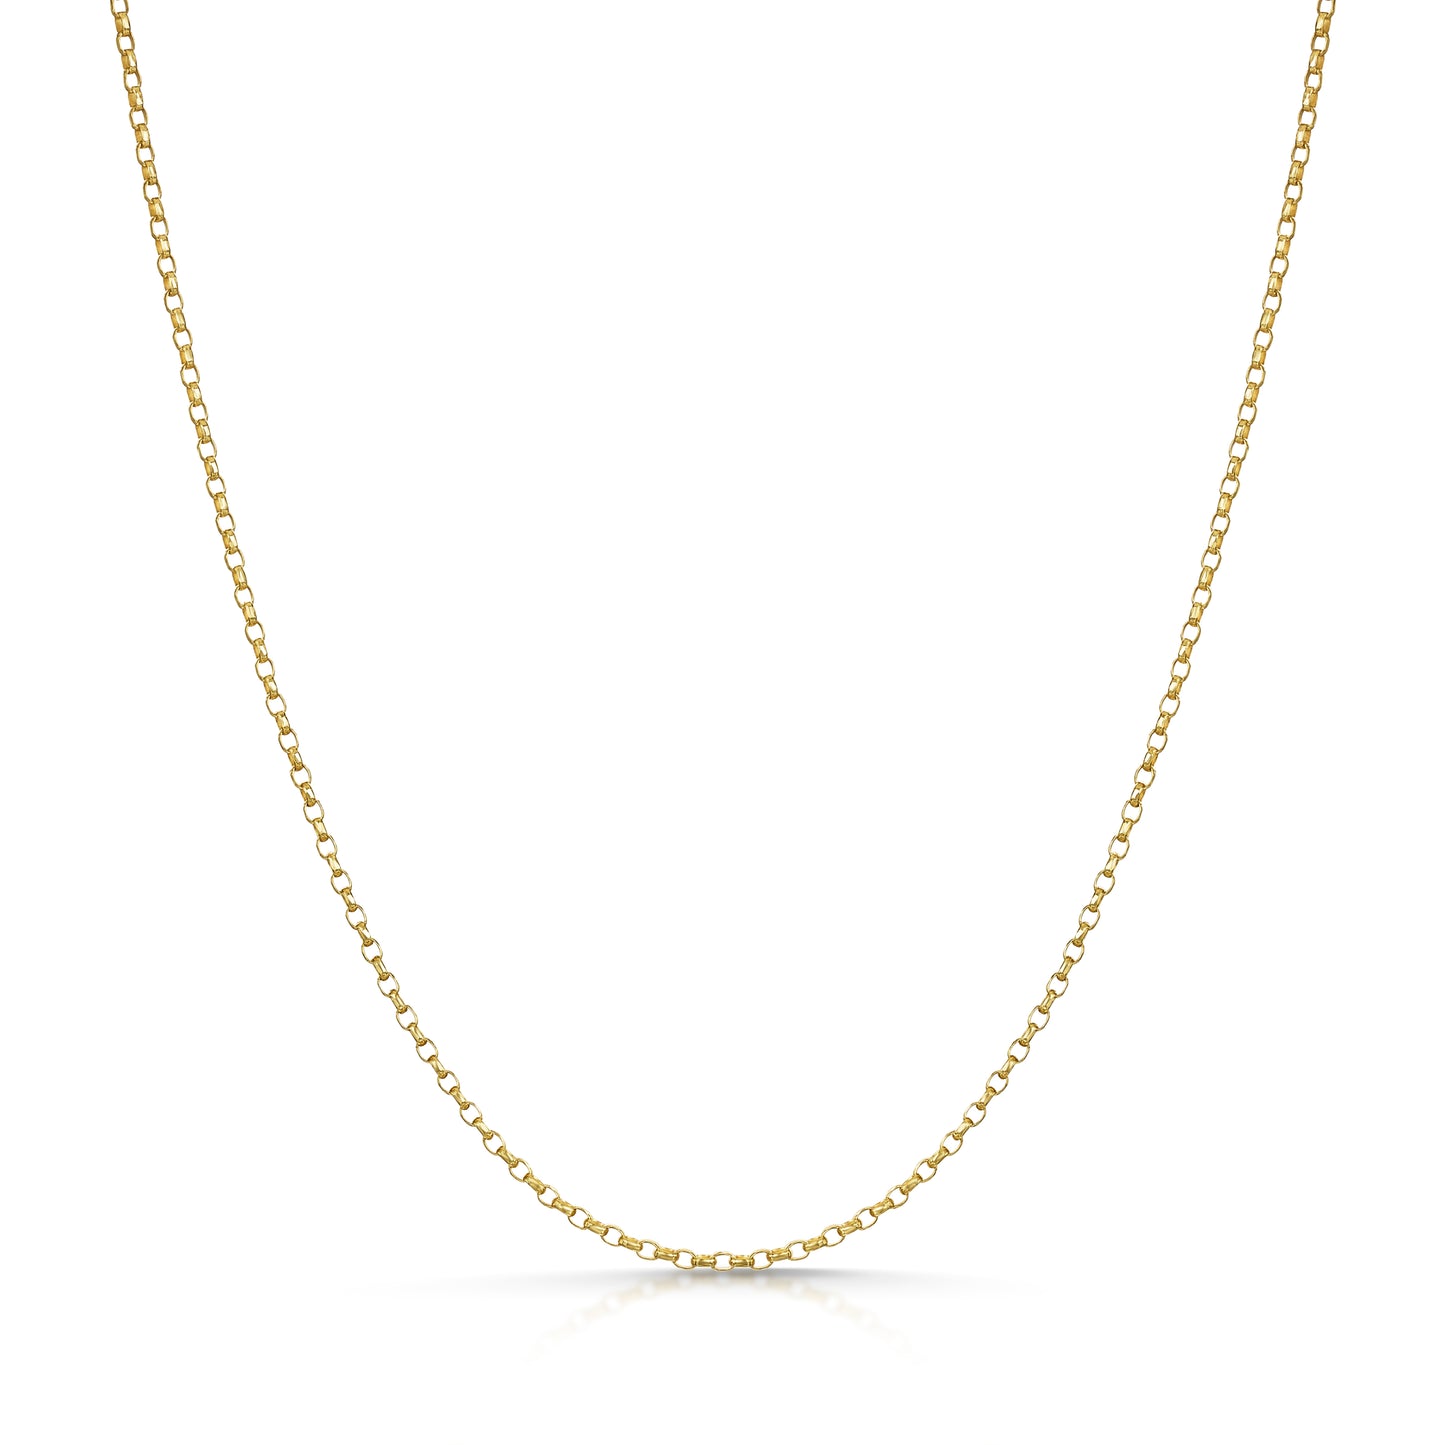 9k solid yellow gold belcher necklace chain